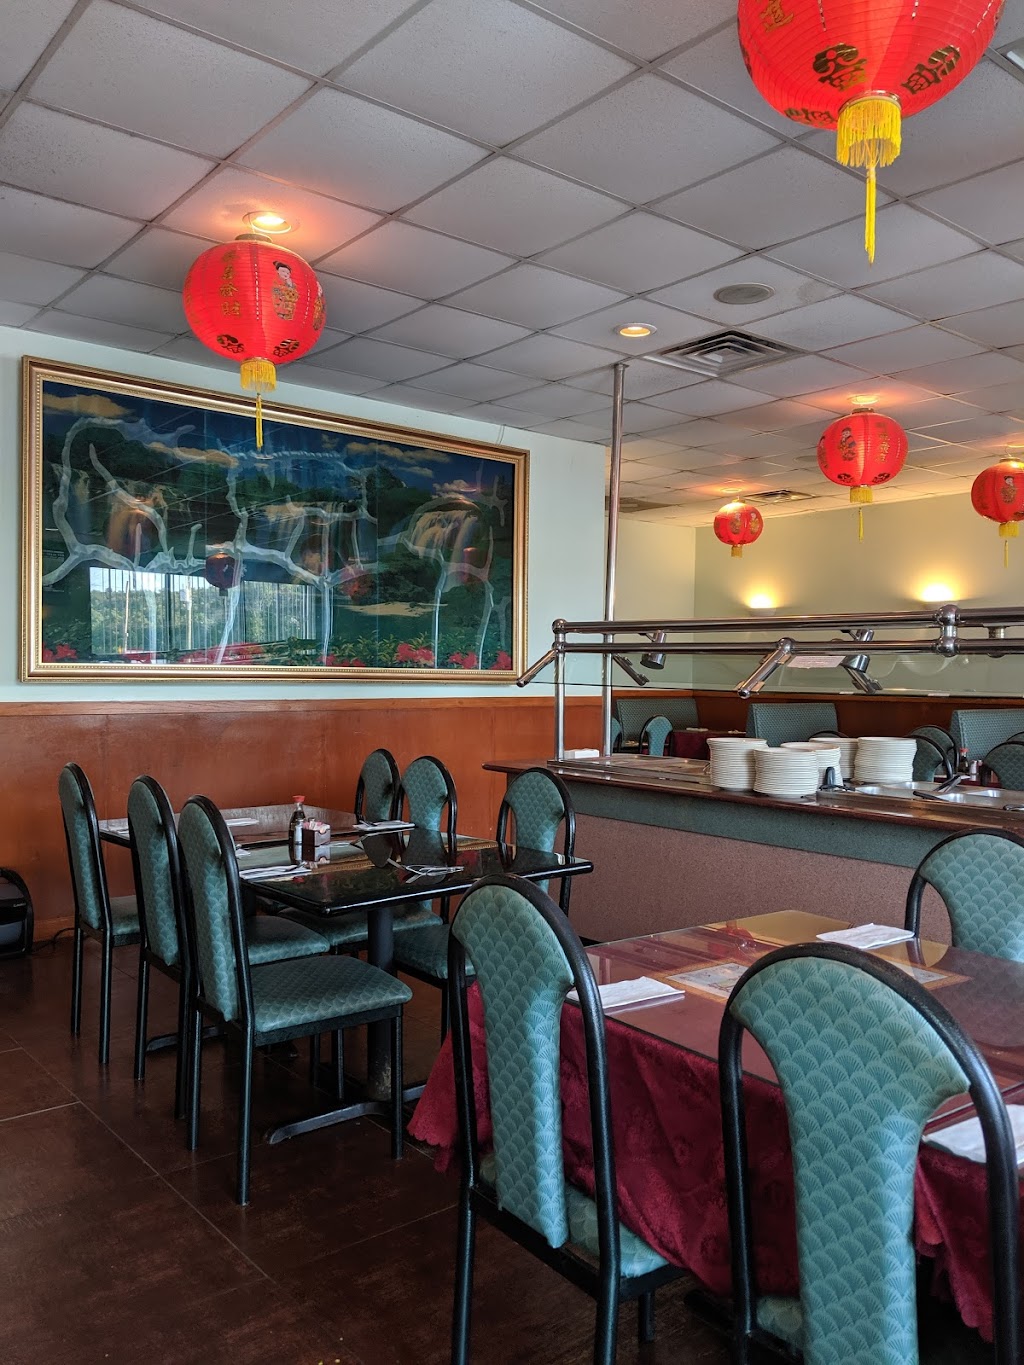 New China Garden | 10569 Old Hwy 280, Chelsea, AL 35043, USA | Phone: (205) 678-2828